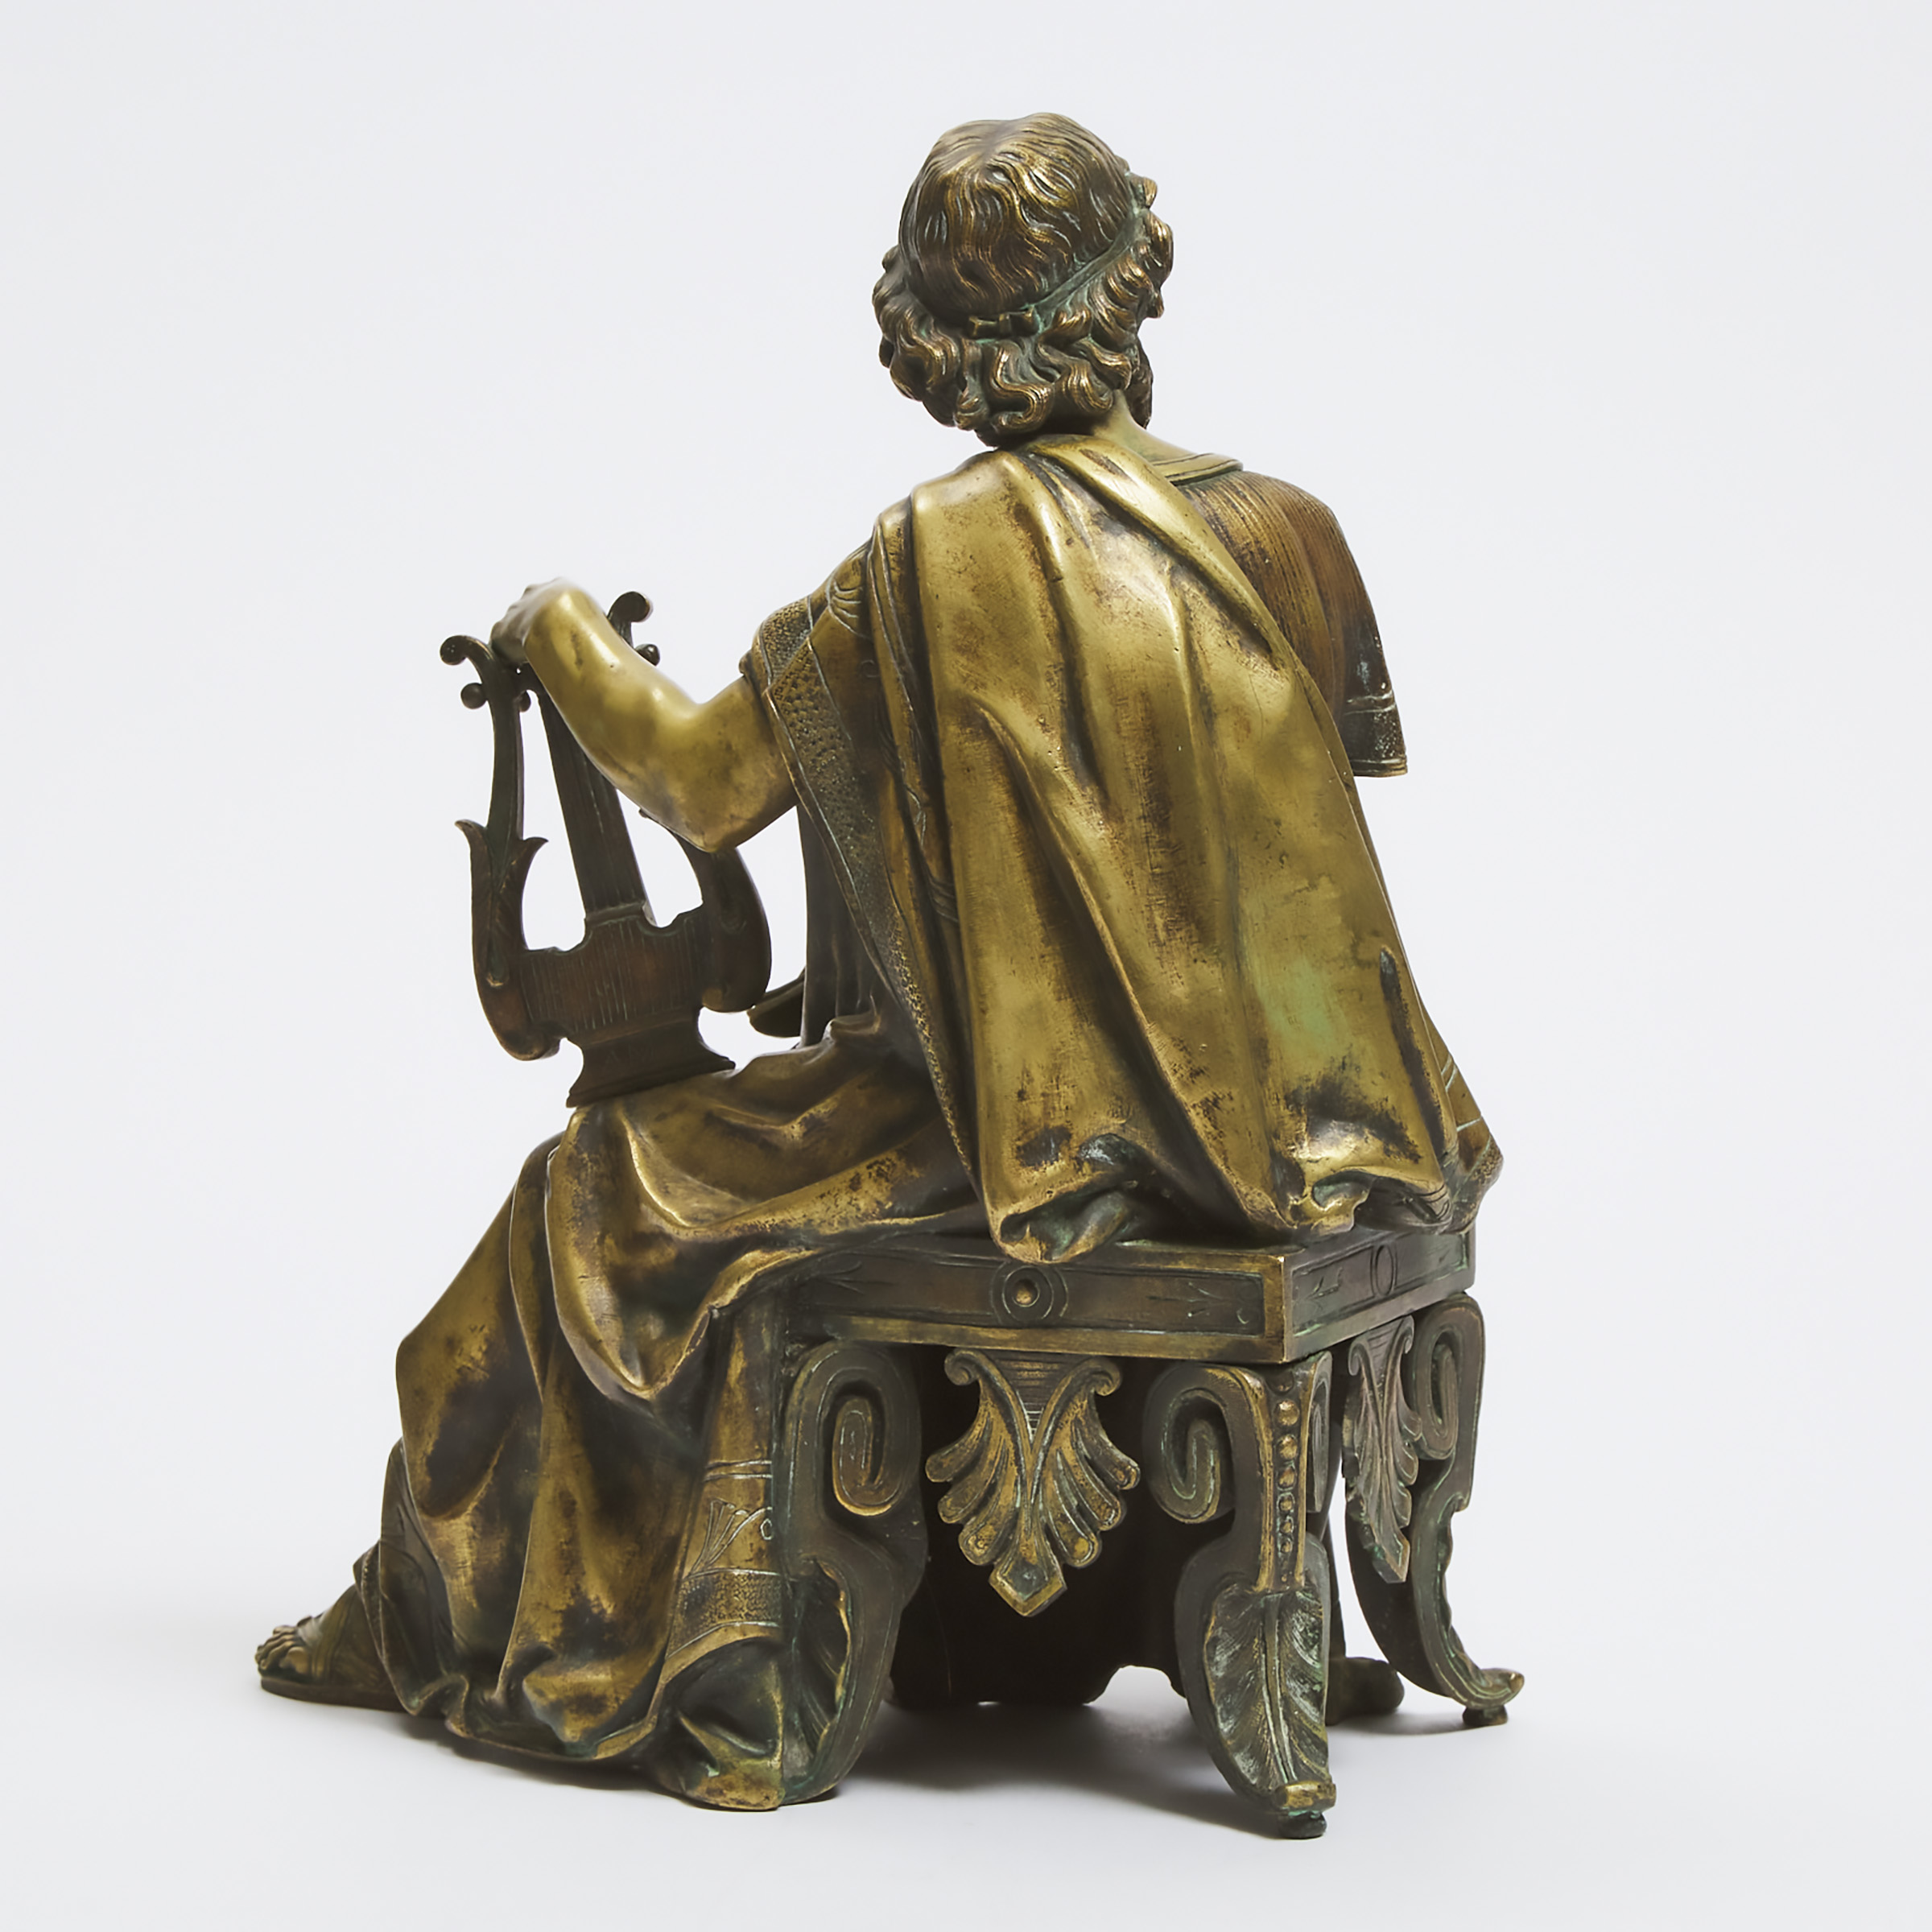 French Polished Bronze Figure of a Philosopher, after Theodore Doriot, mid 19th century